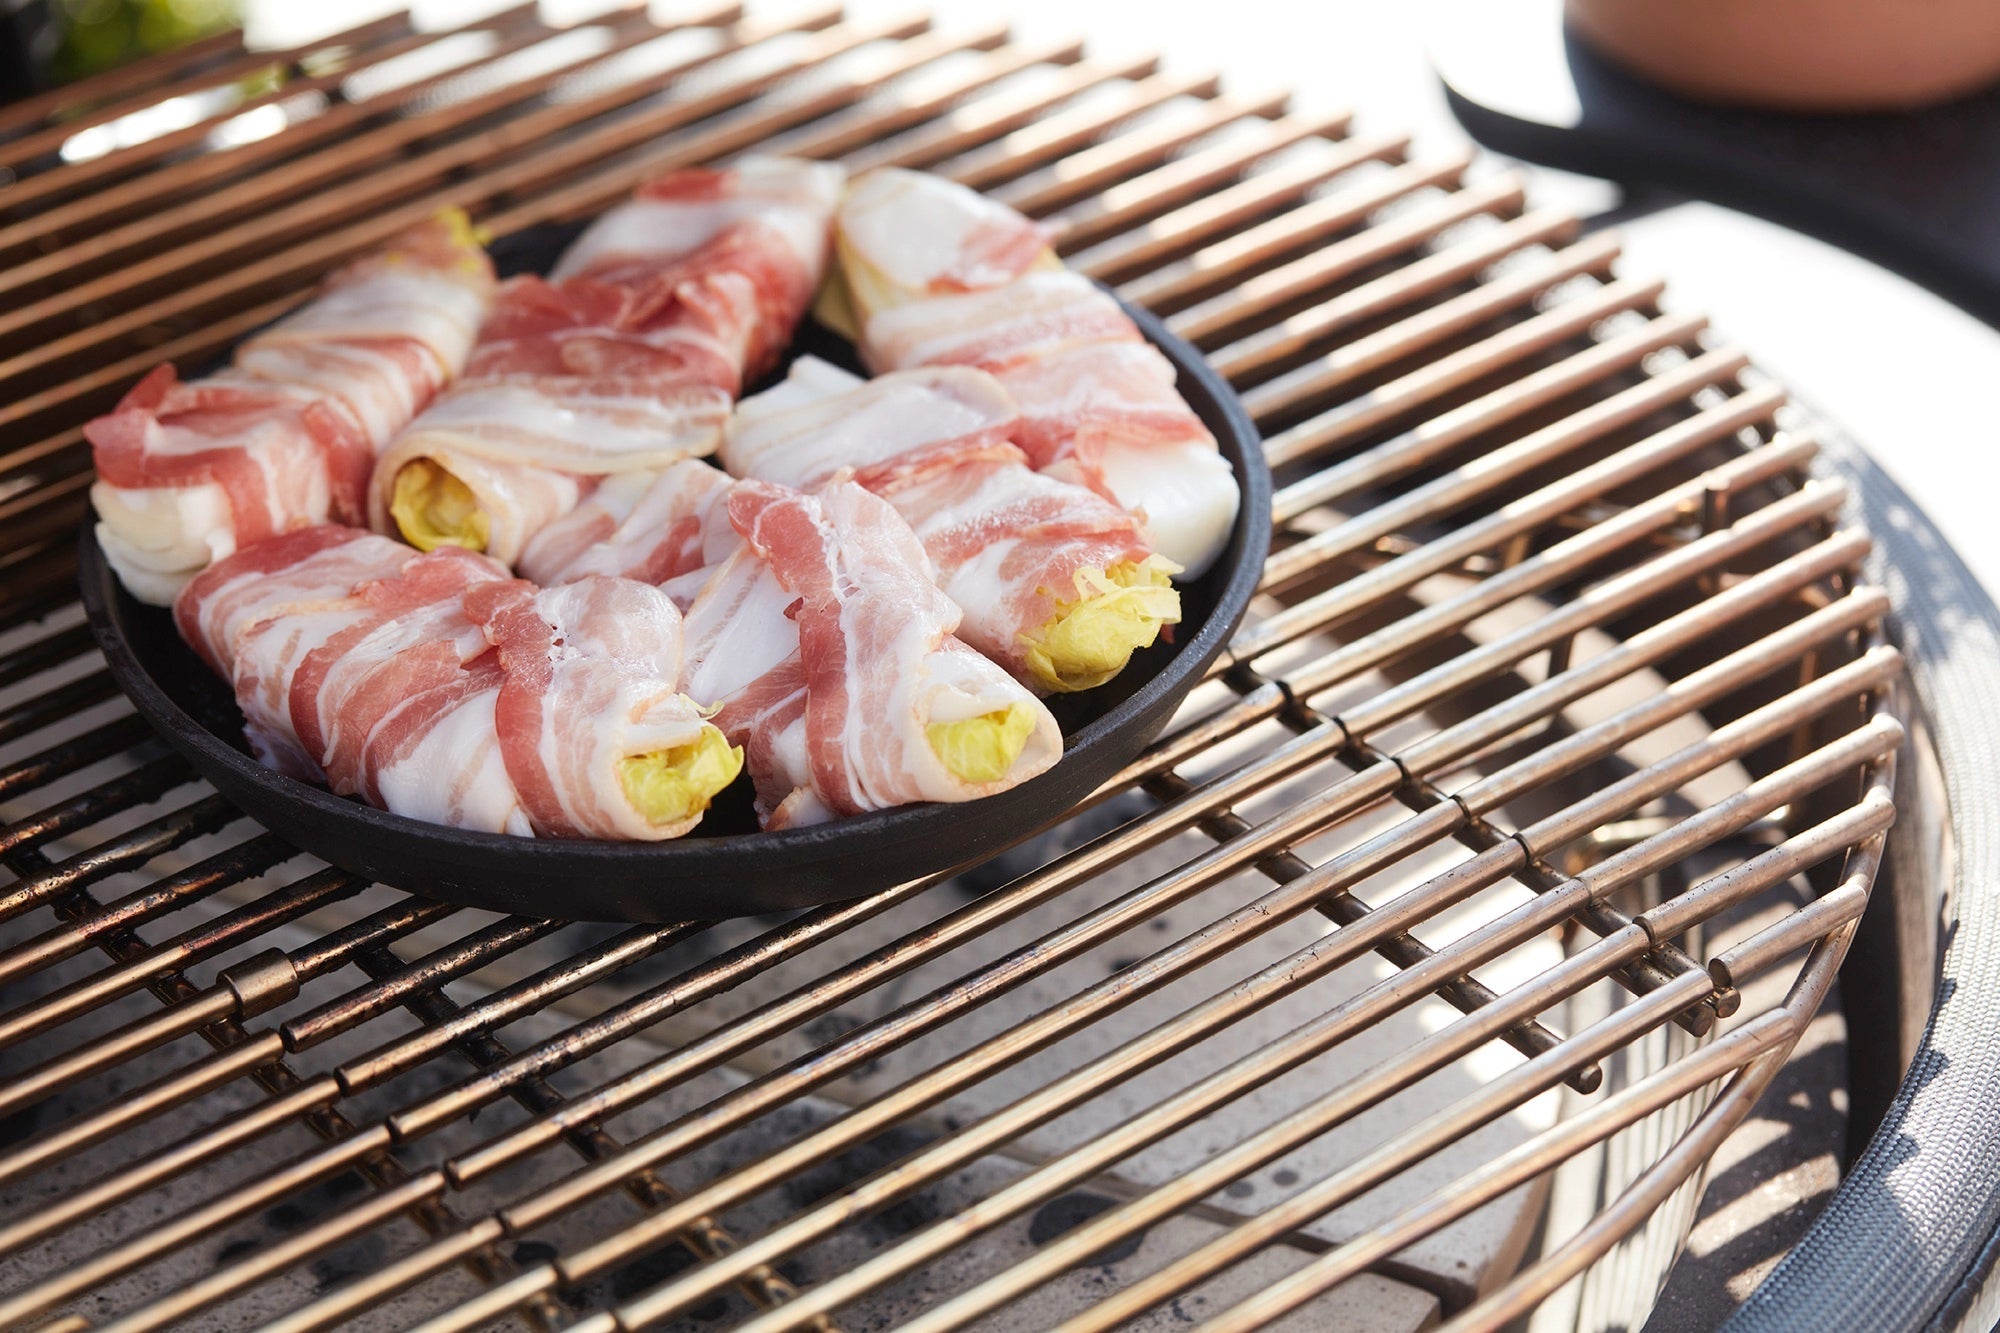 Chicory rolls with bacon on the BBQ